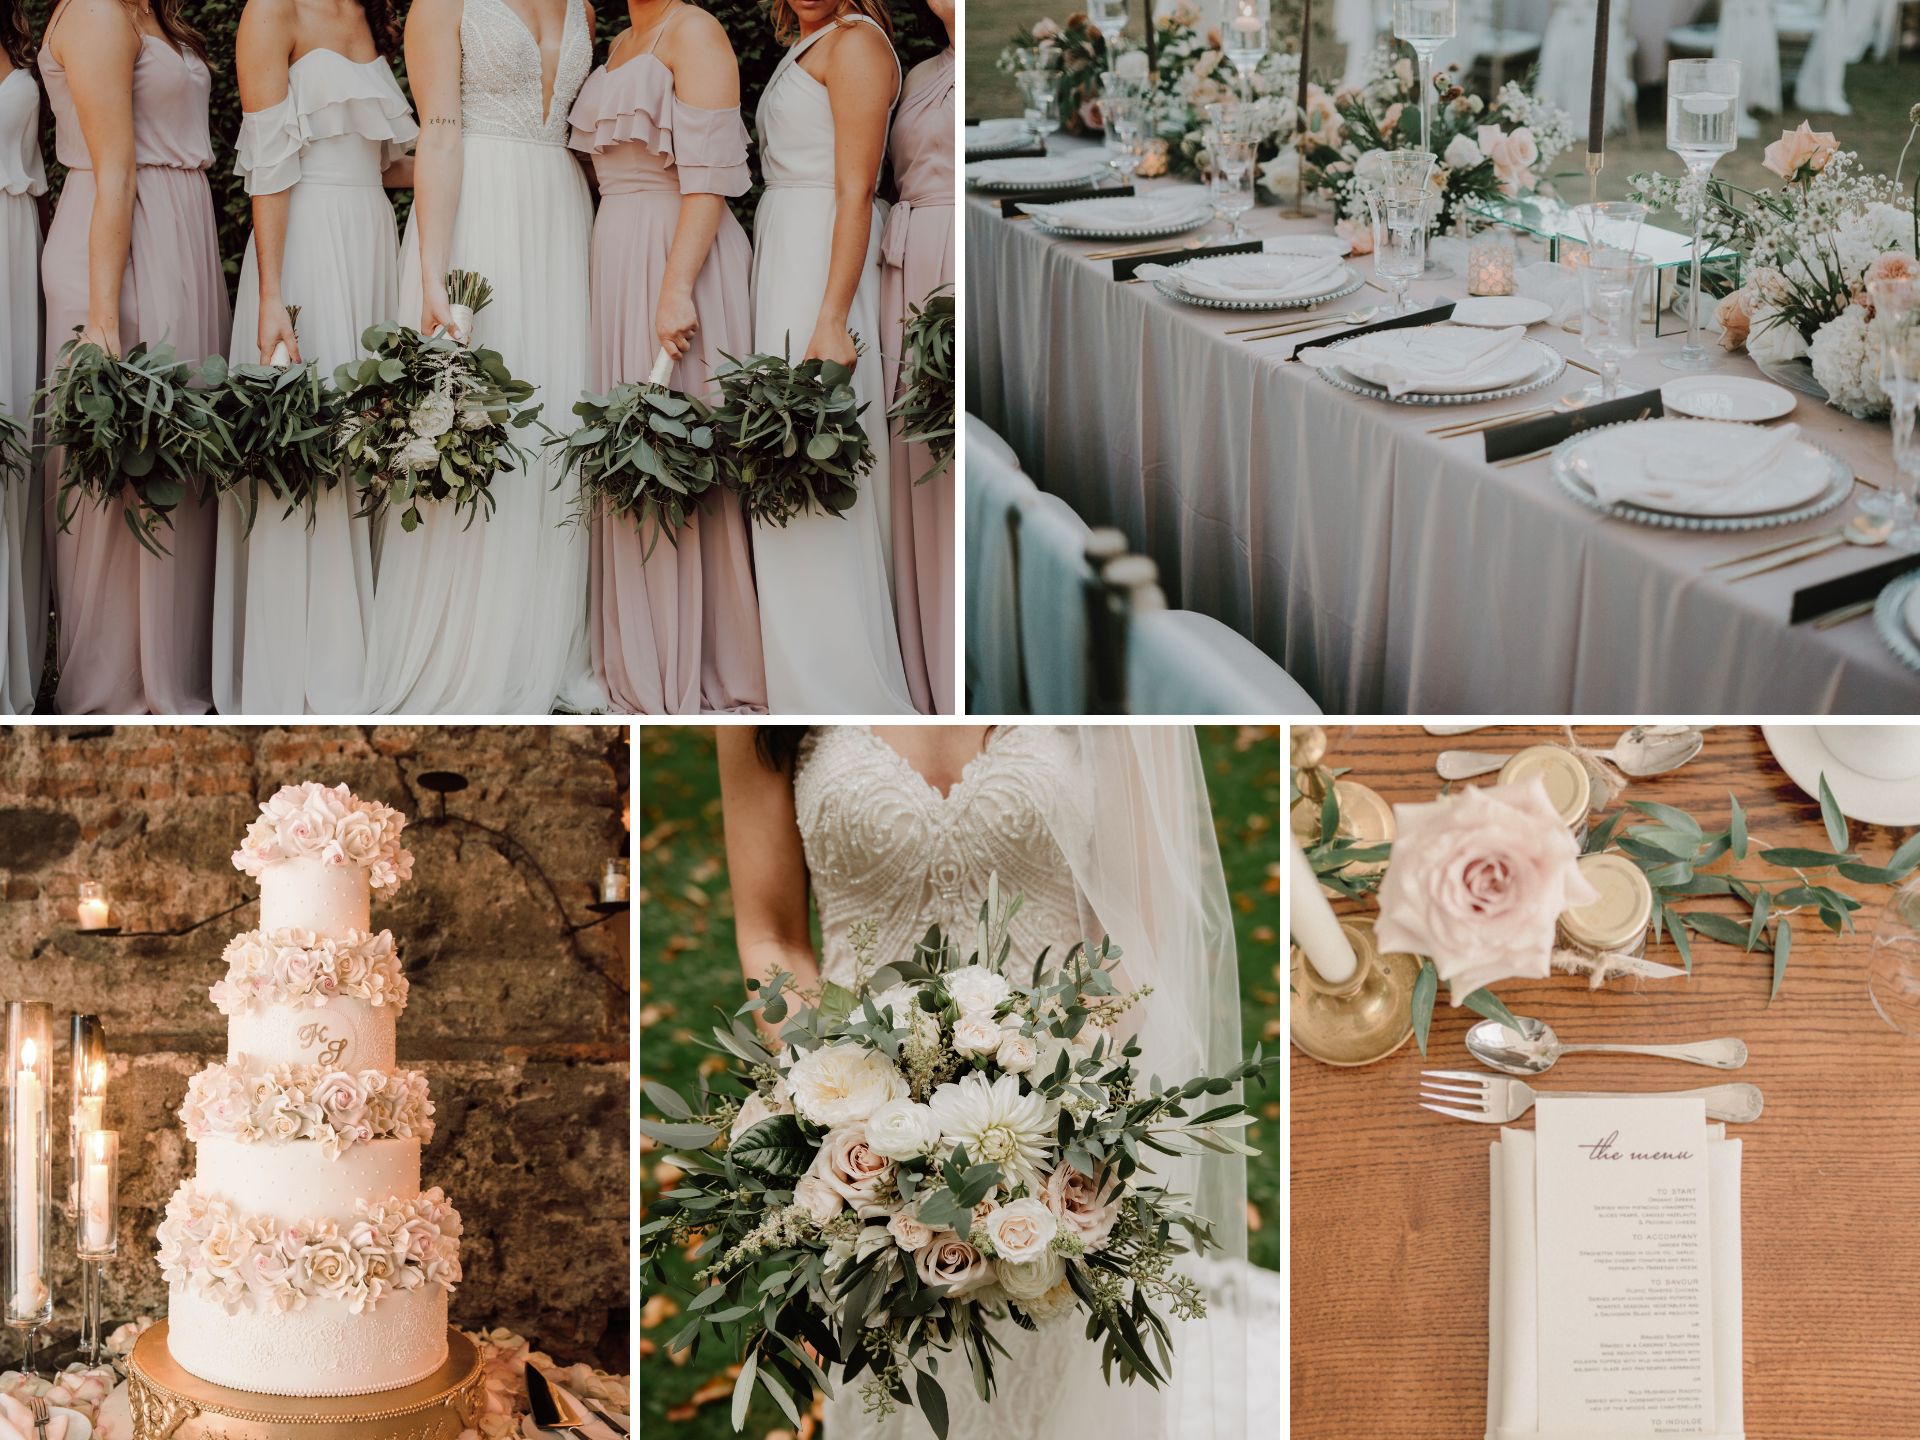 A photo collage with spring wedding color ideas.